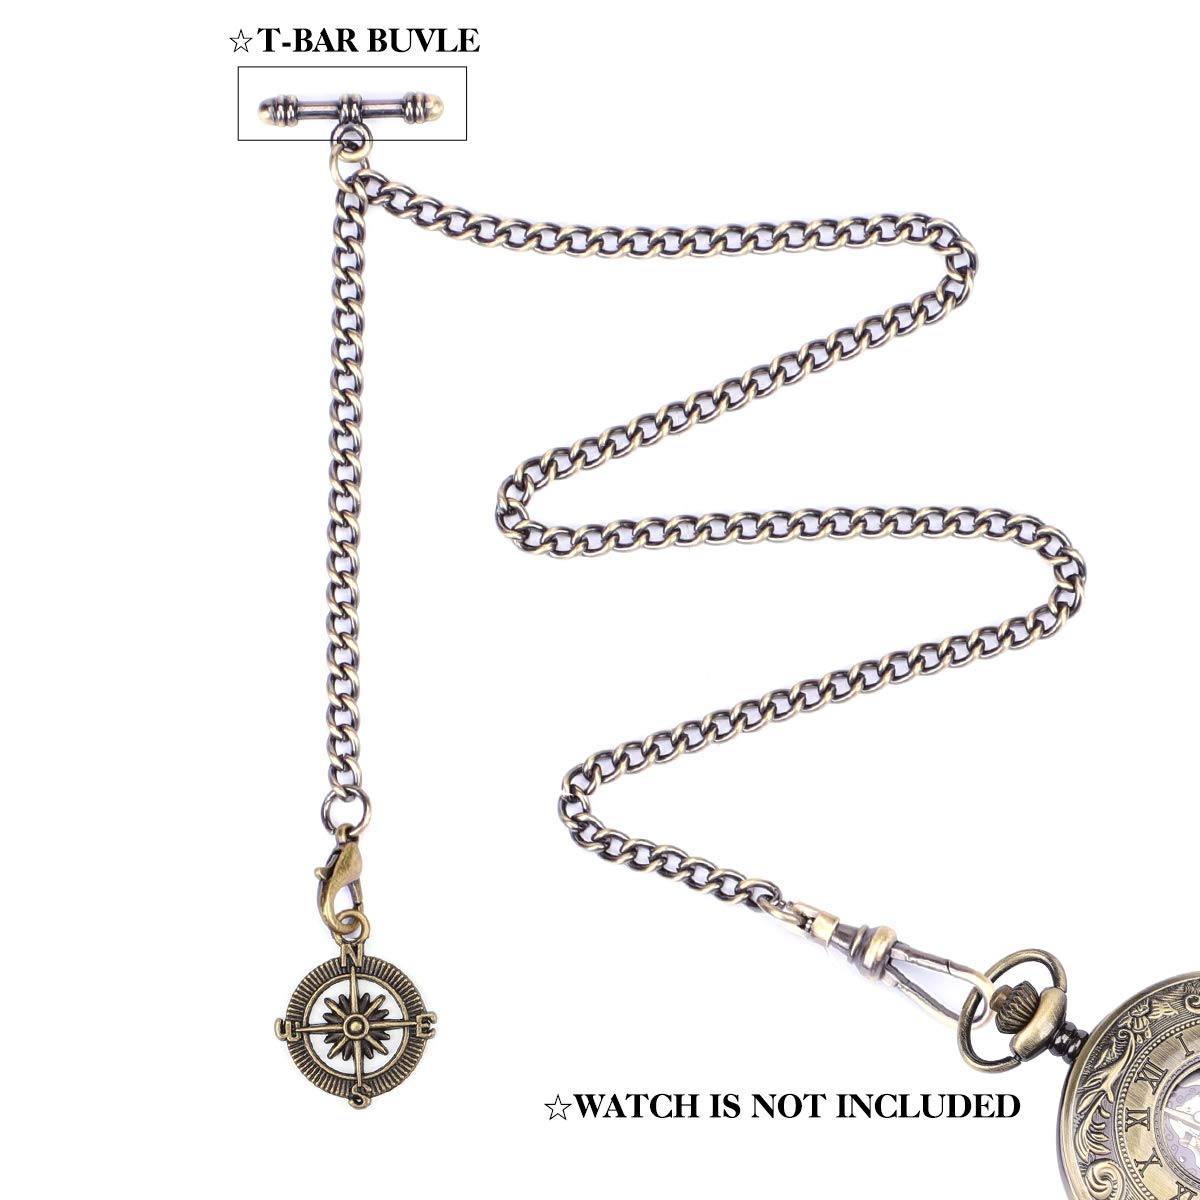 ManChDa Pocket Watch Albert Vest Chain with T Bar & Lobster Clasps, Watch Chain Curb Link Chain & Pocket Watch Stand（Silver）